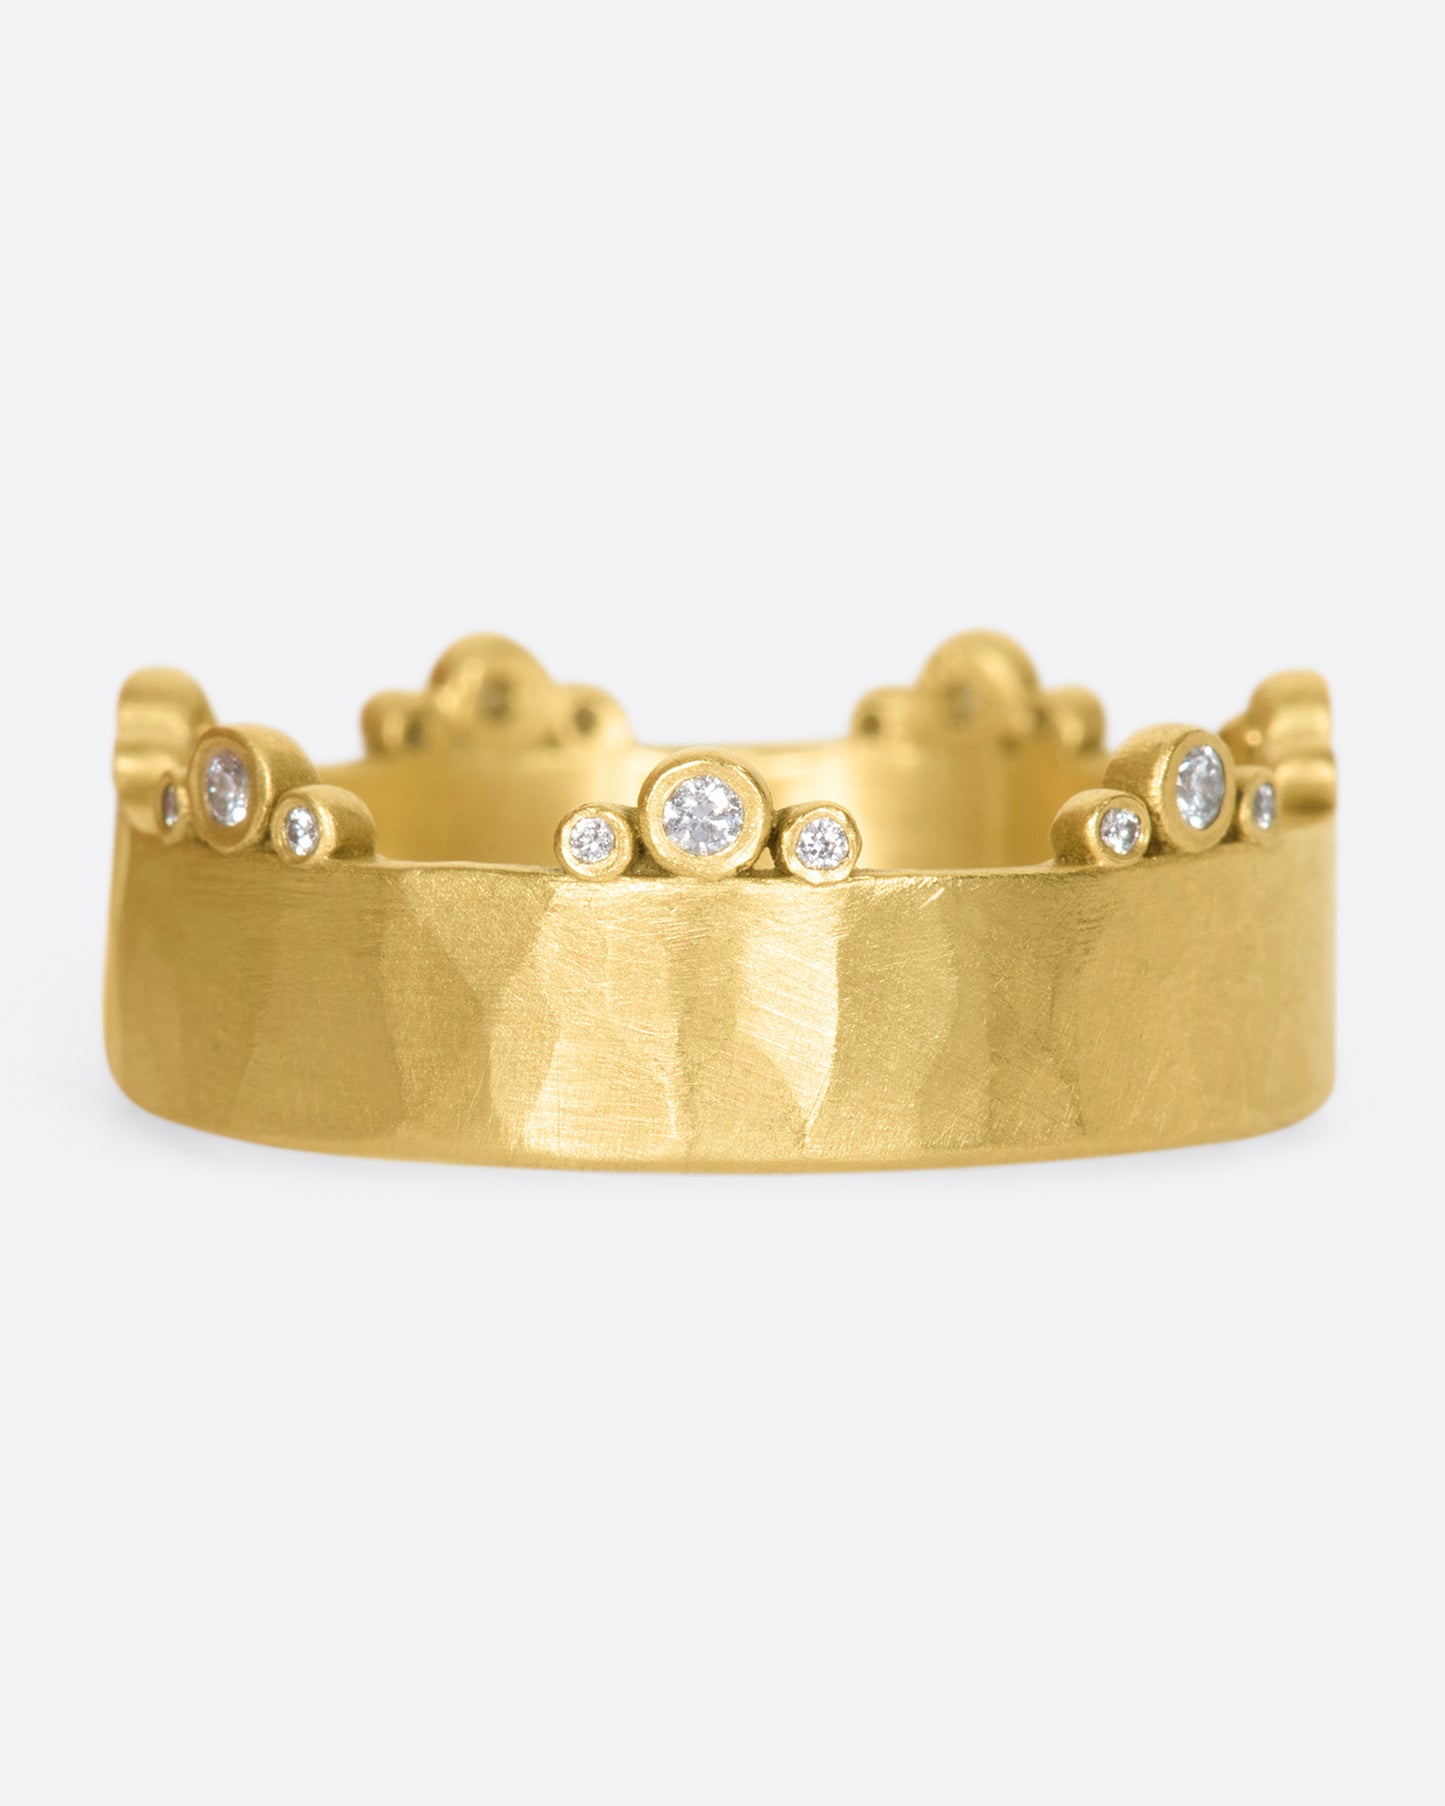 A wide, hammered, matte gold band with stations of diamonds along one edge.